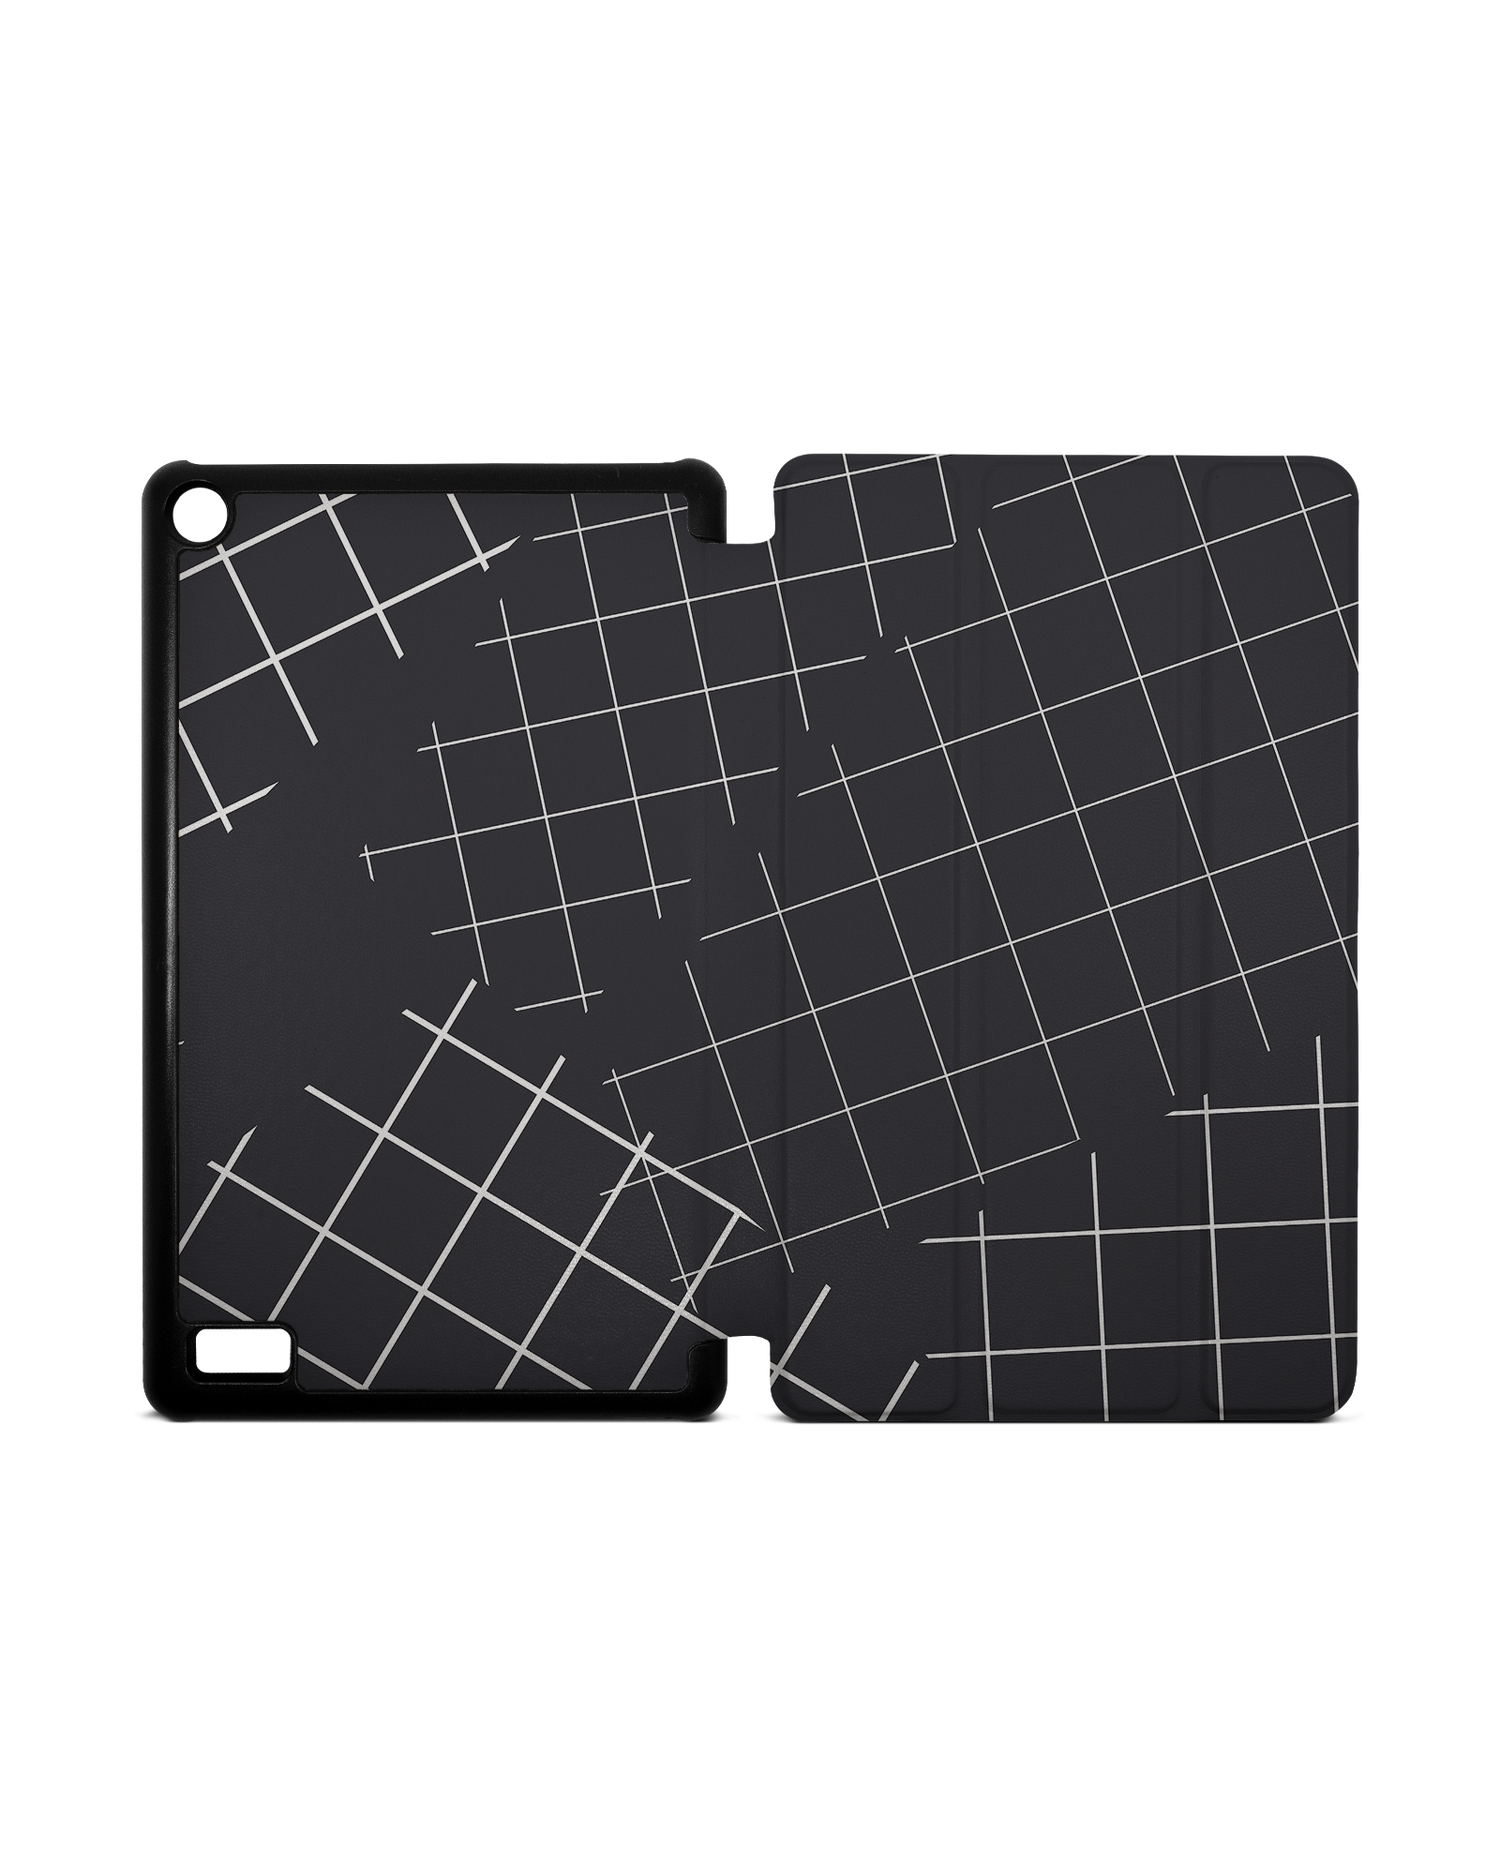 Grids Tablet Smart Case for Amazon Fire 7: Opened